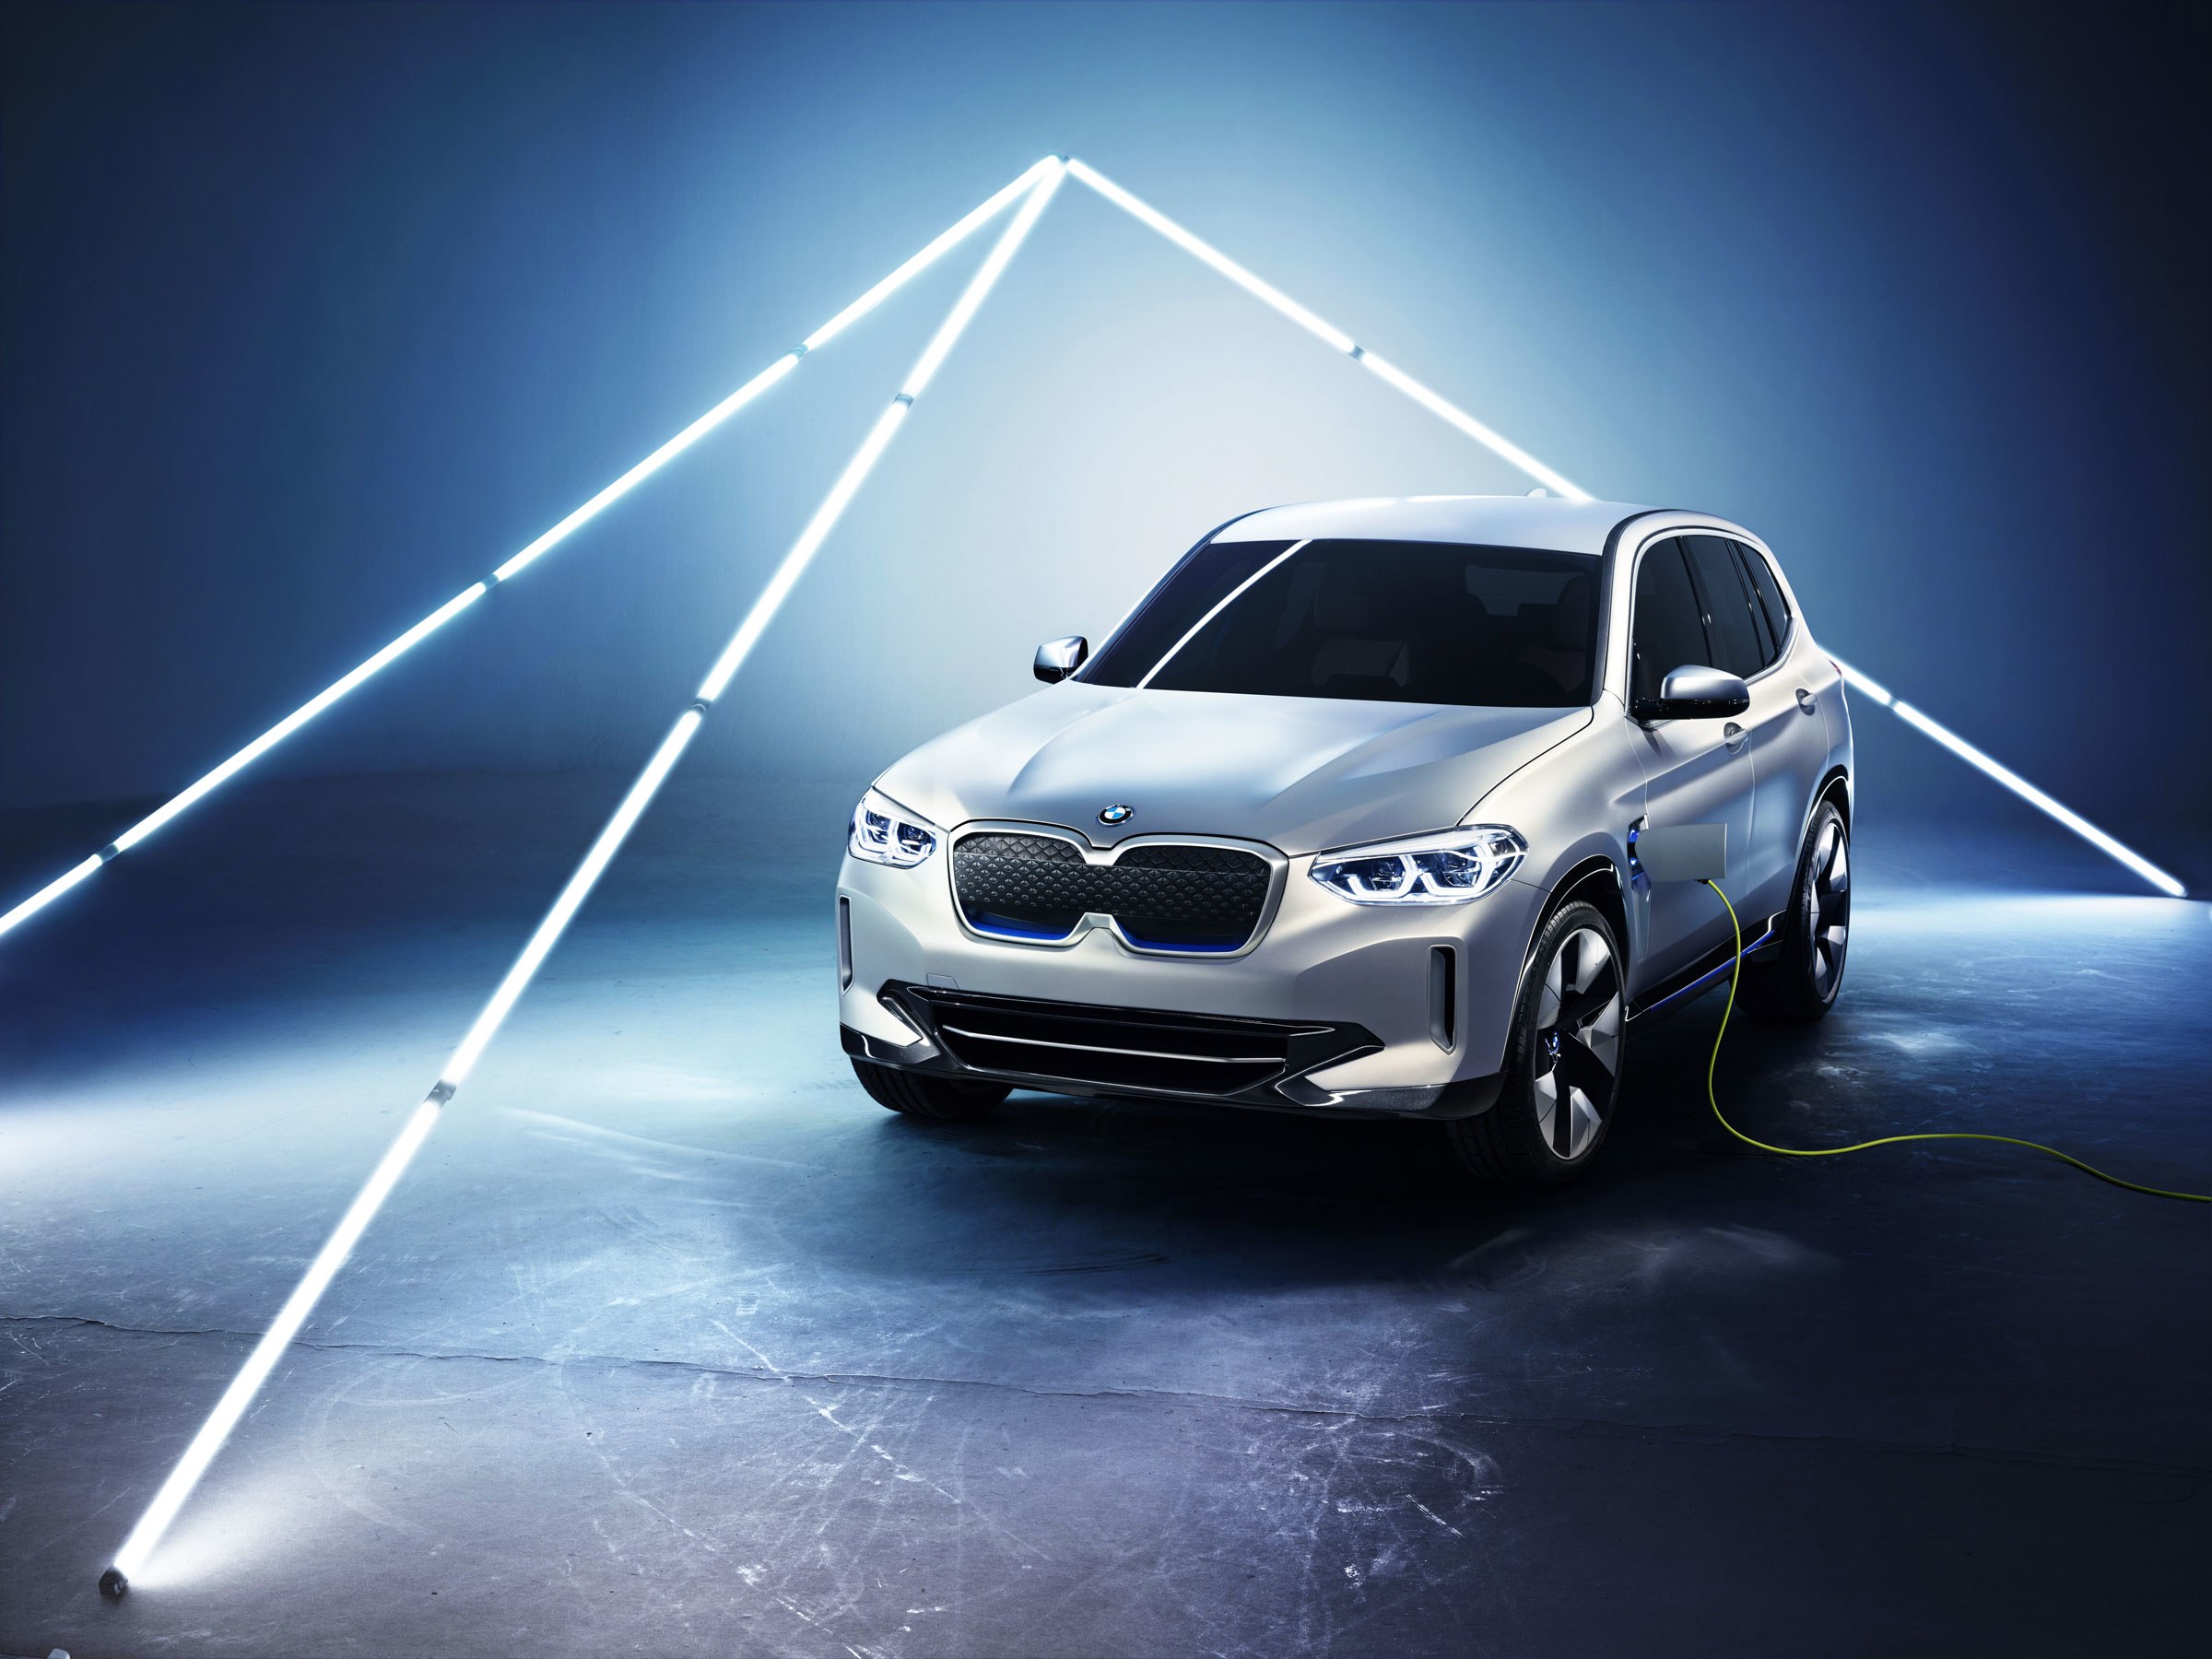 BMW's New Electric iX3 SUV Looks Shockingly Normal | WIRED